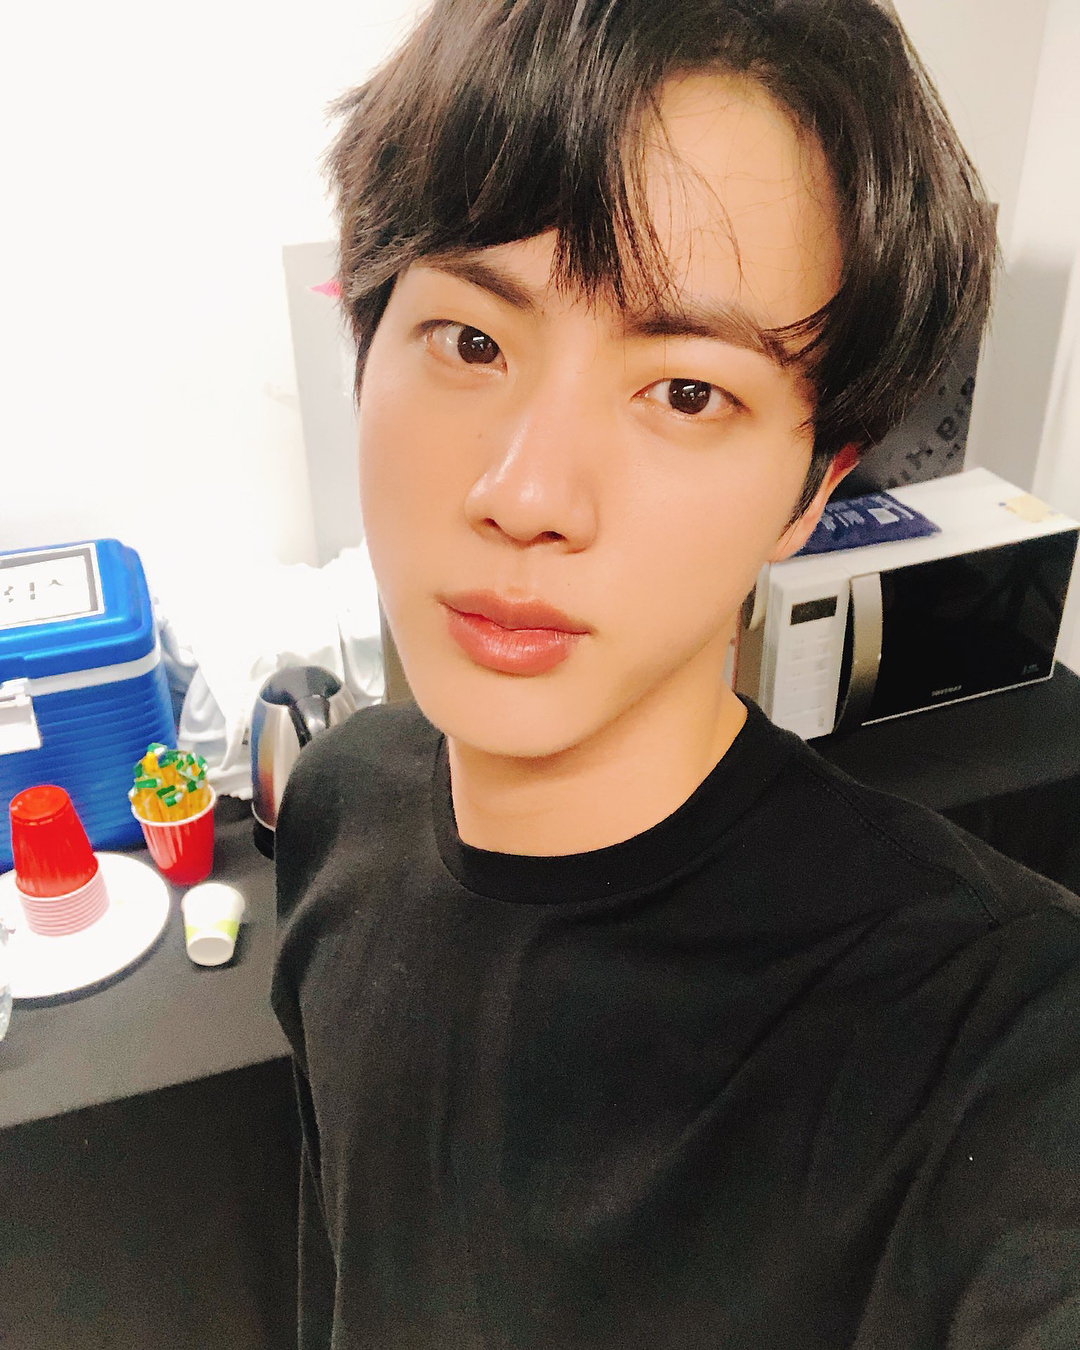 BTS JIN to Make His Acting Debut Soon?